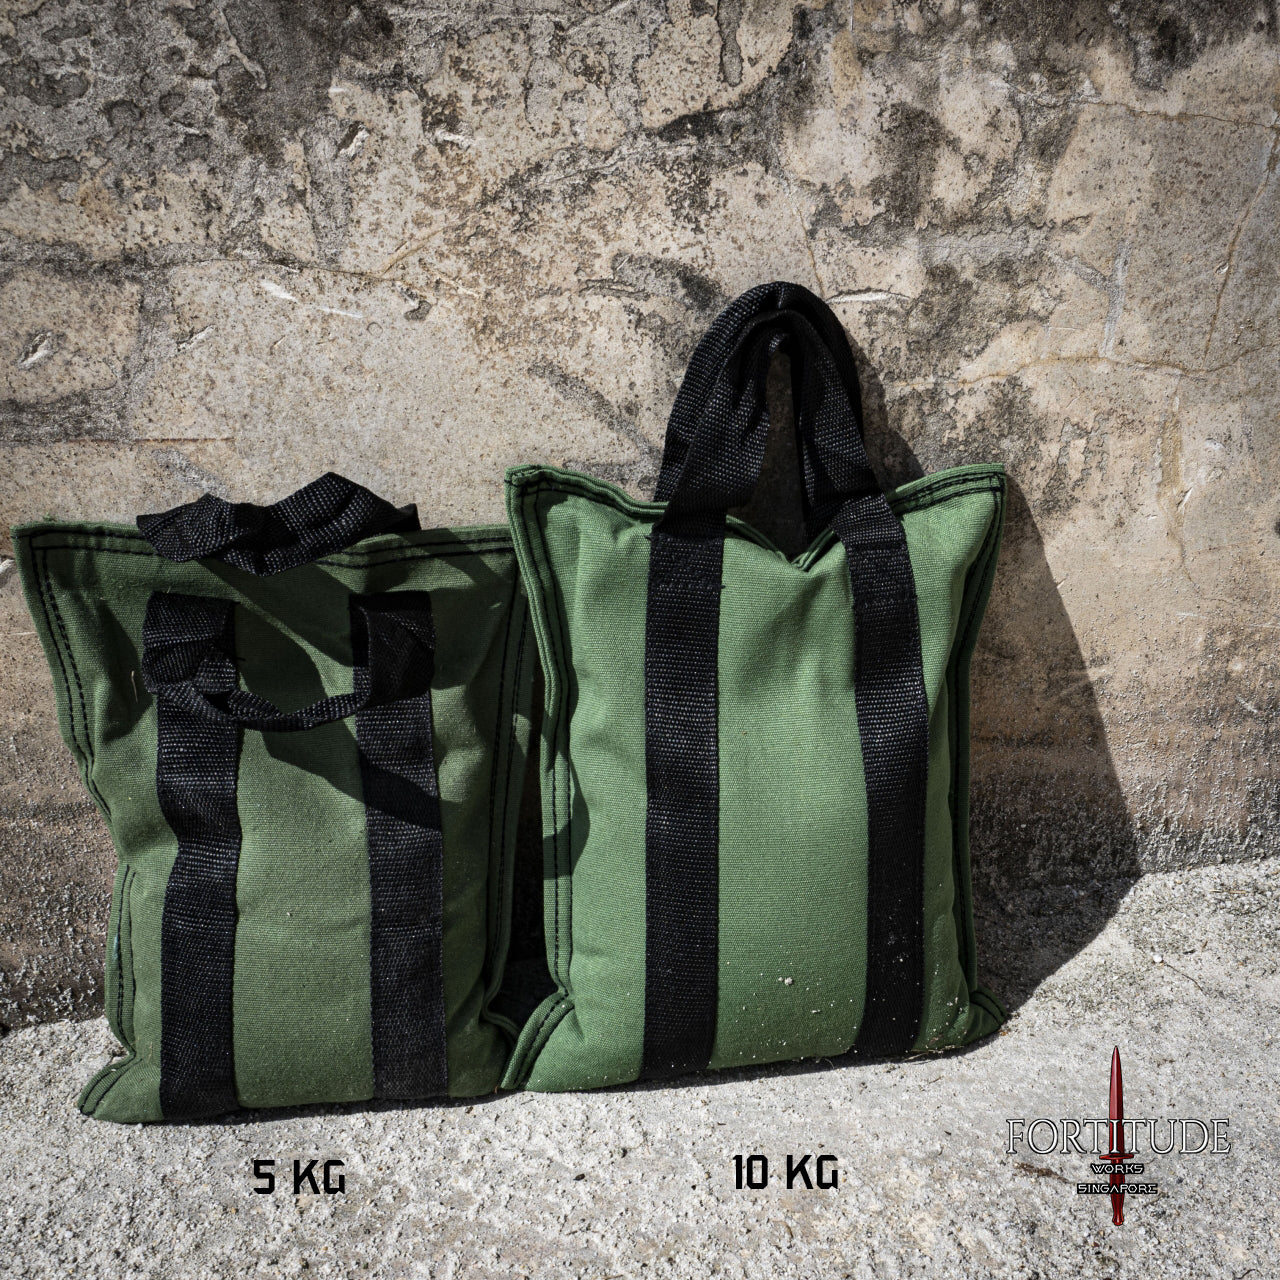 CRUCIBLE RUCK WEIGHTS - 5KG - FORTITUDE WORKS SINGAPORE